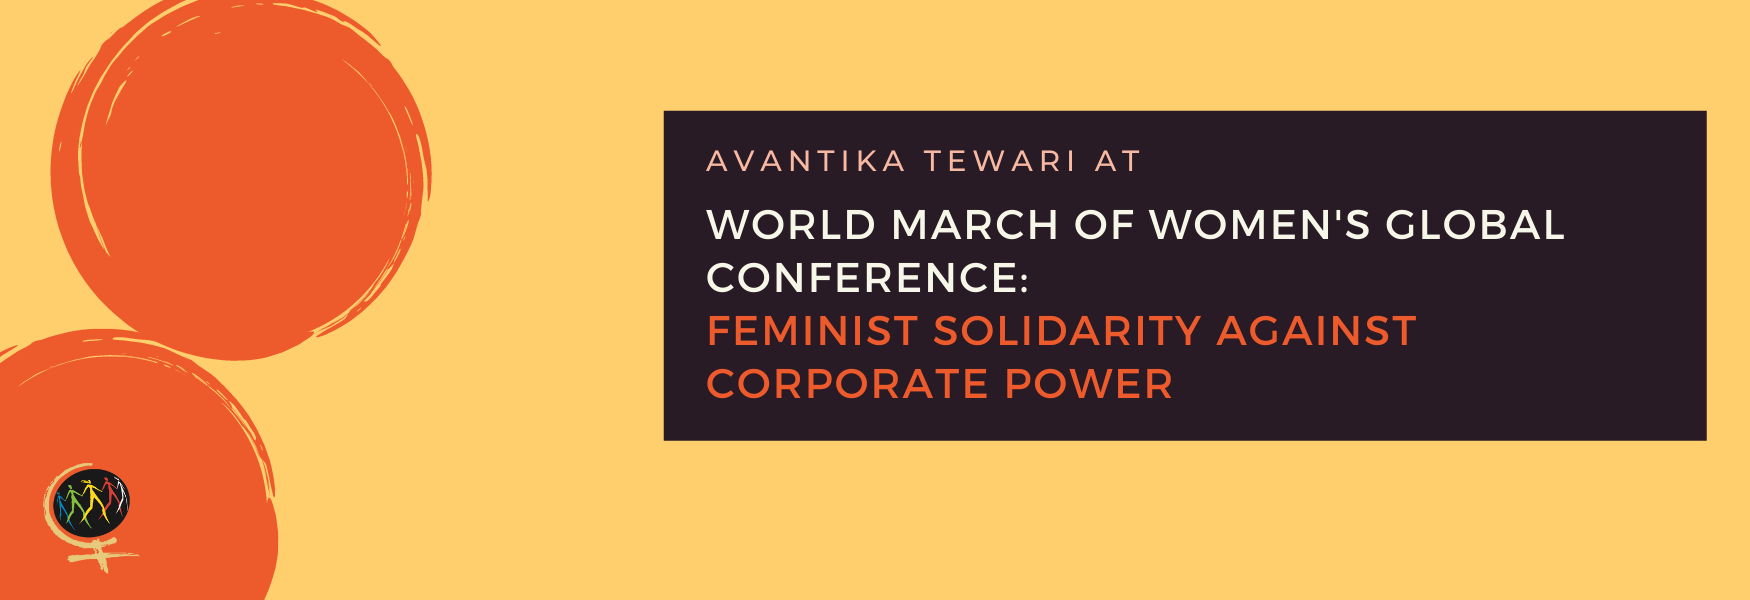 World March of Women's Global Conference: Feminist Solidarity Against Corporate Power"